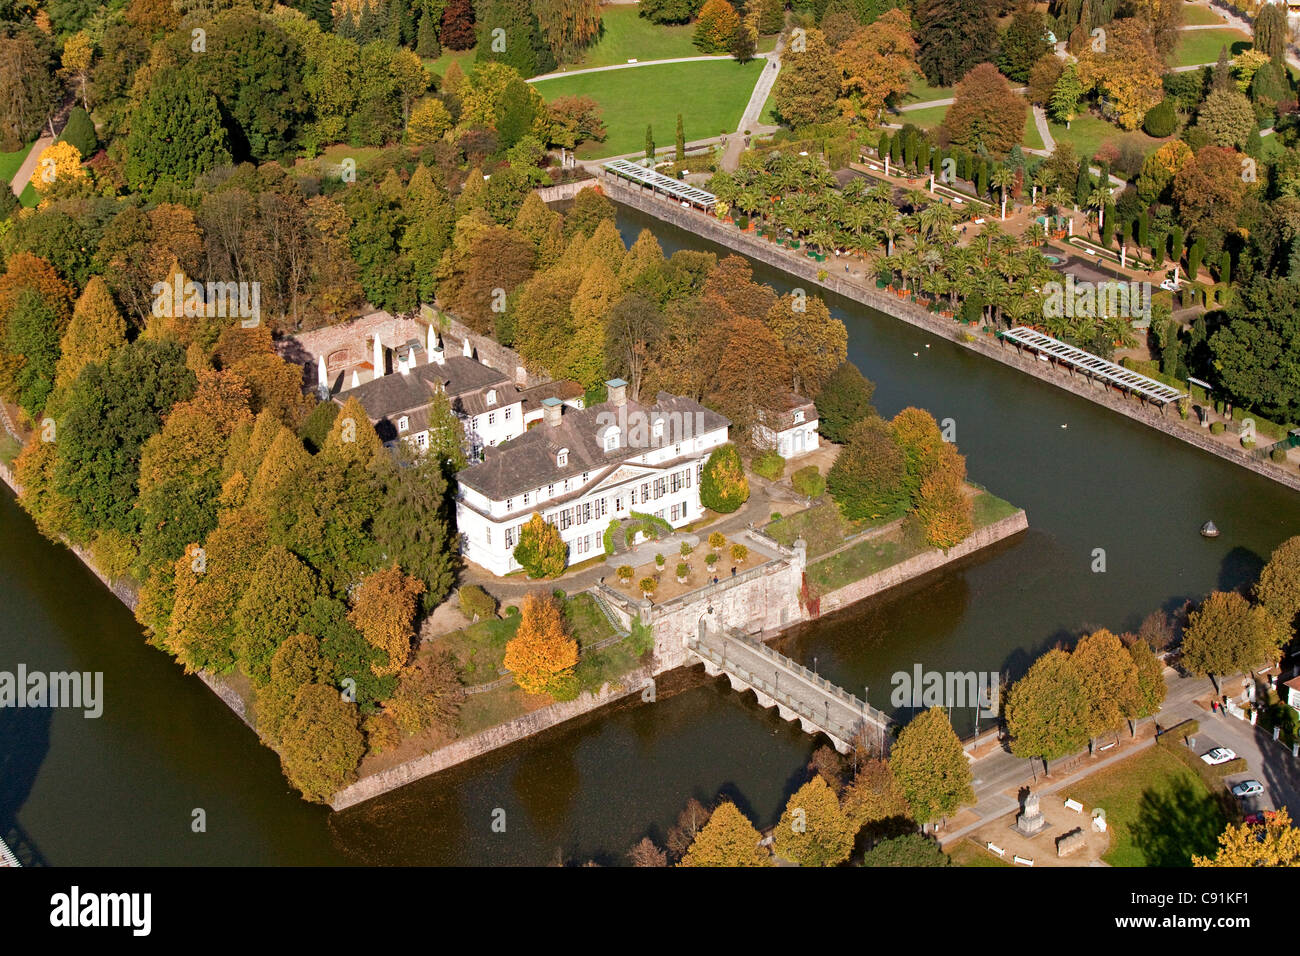 Aerial view of Bad Pyrmont castle and gardens, moat and palm garden, Lower Saxony, Germany Stock Photo